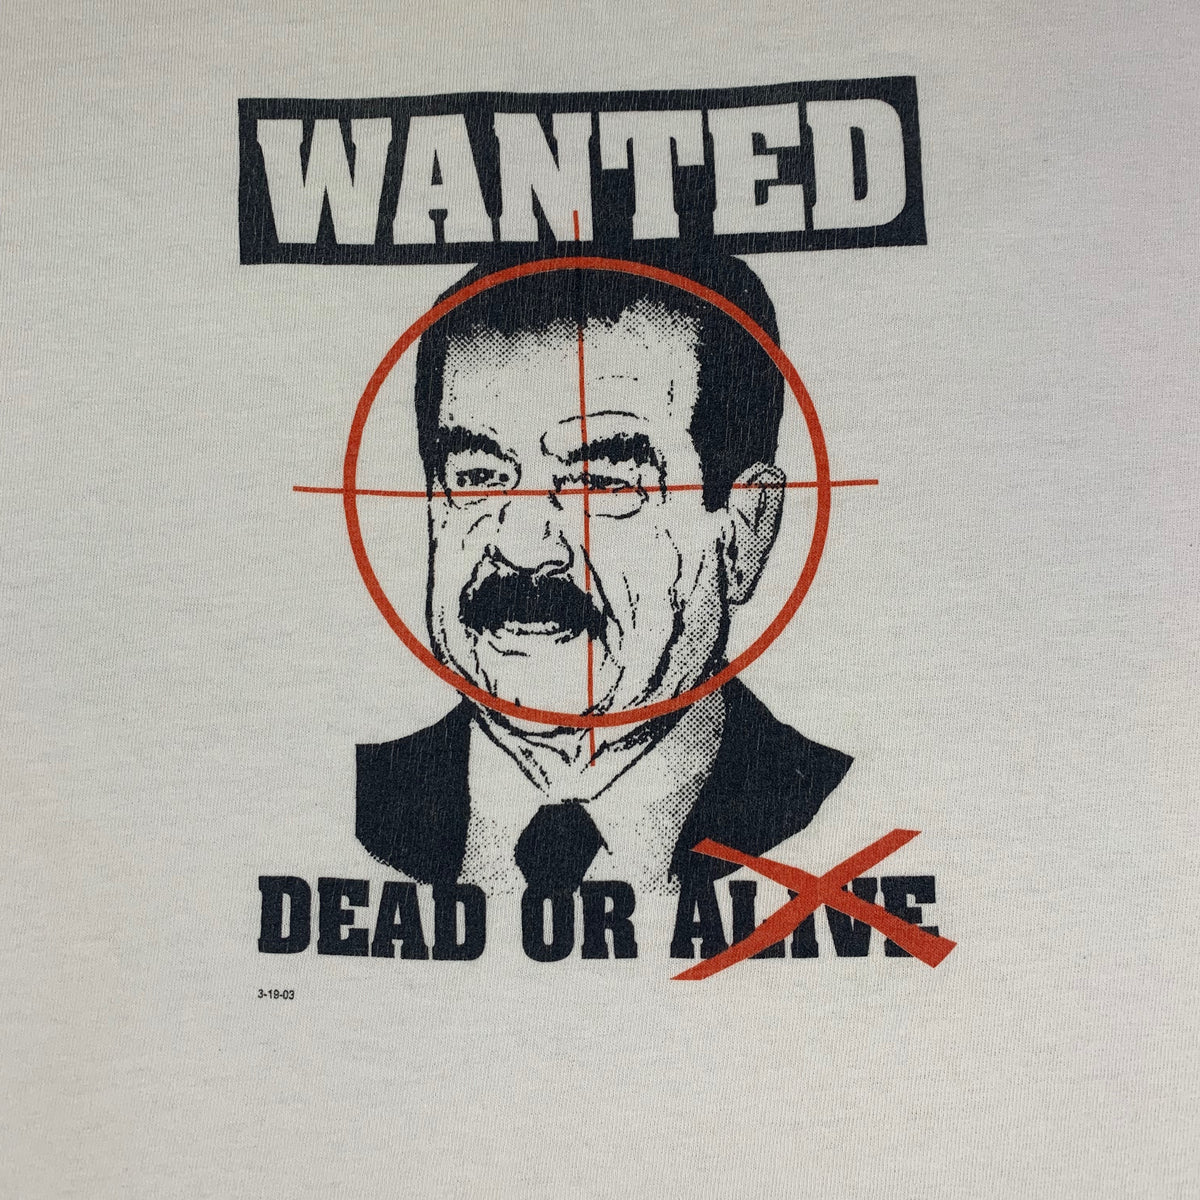 Vintage Saddam Hussein &quot;Wanted&quot; T-Shirt - jointcustodydc